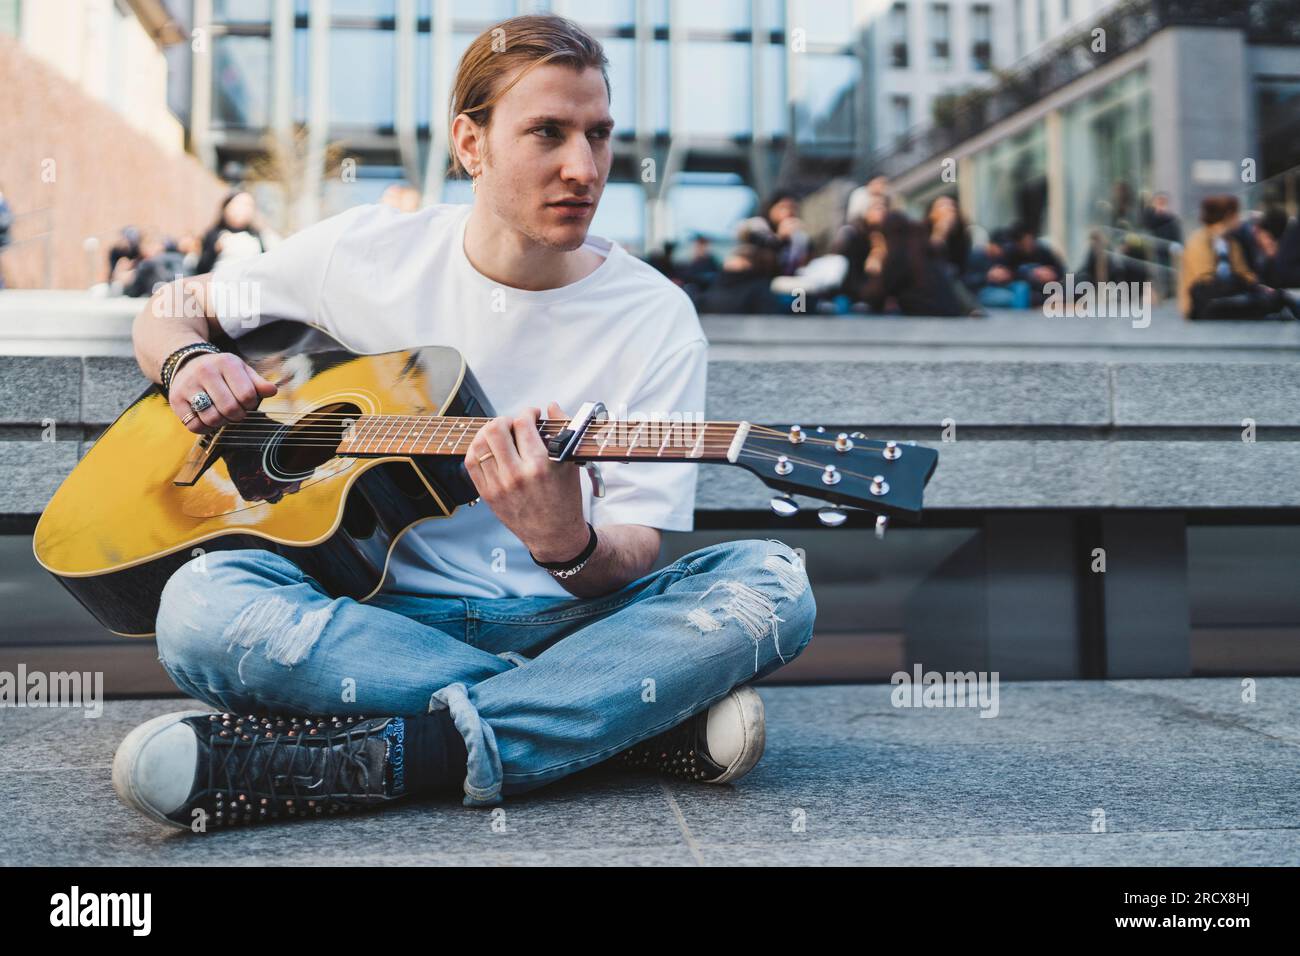 musician looking away is sitting on the floor with people behind Stock Photo